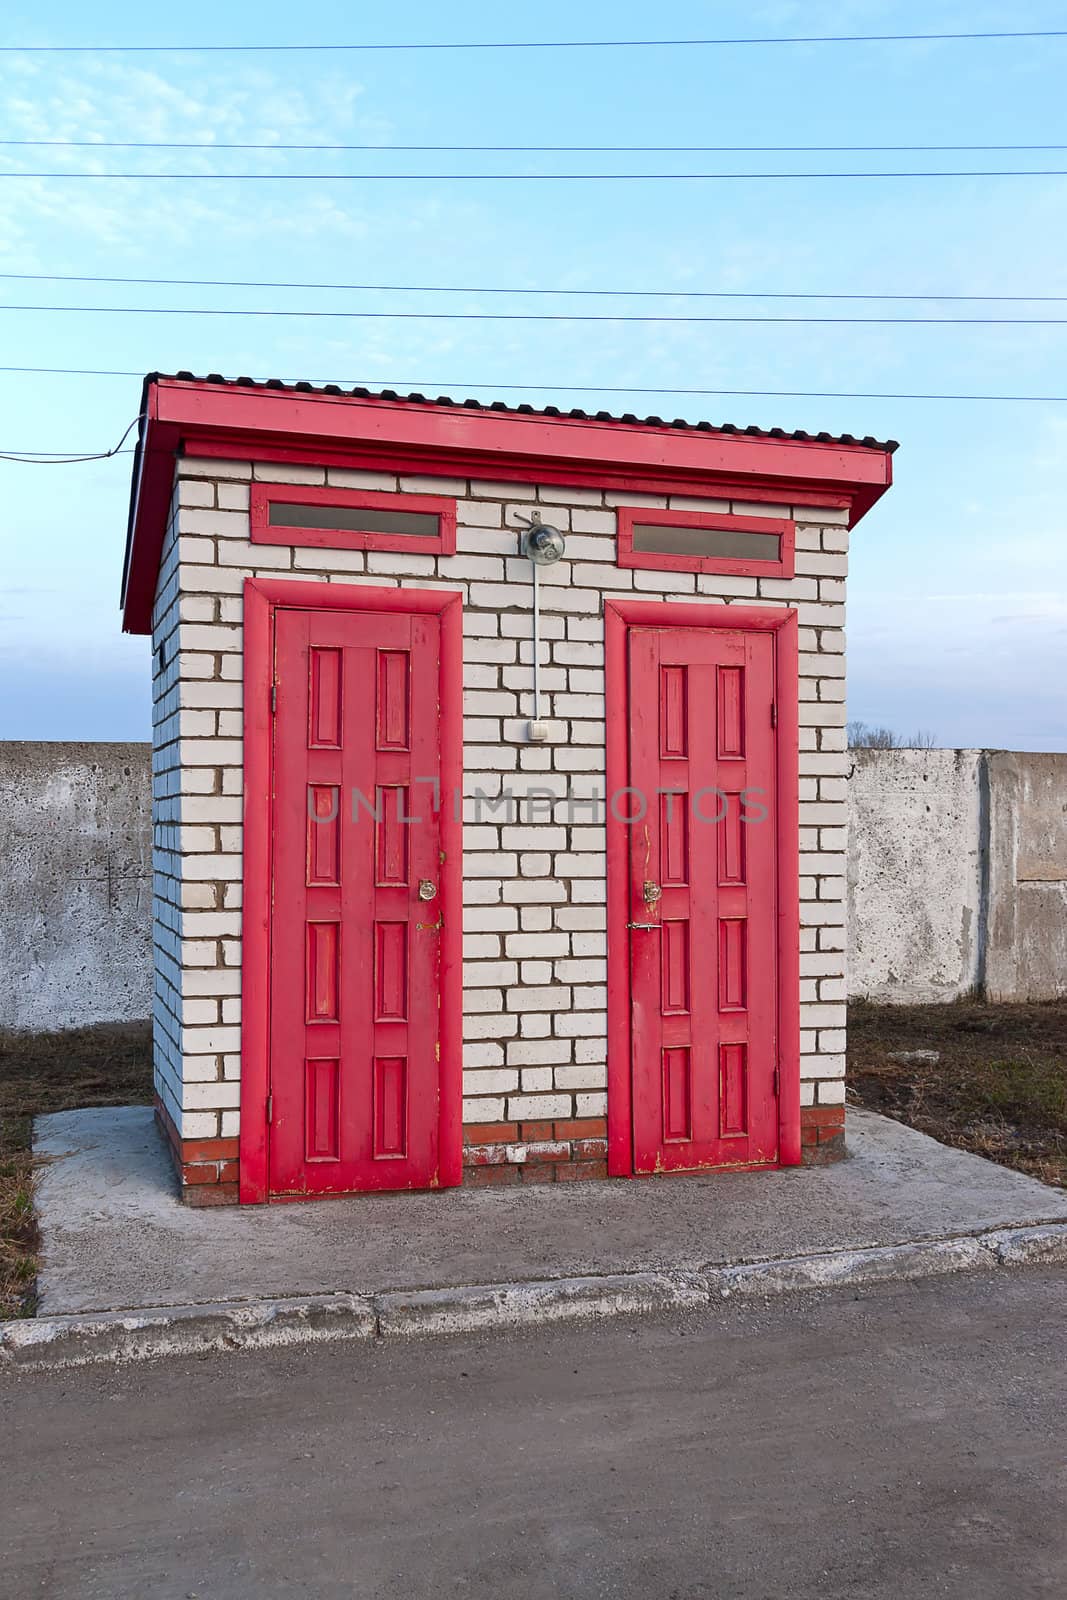 Toilet building with red doors on  wall against  blue sky.